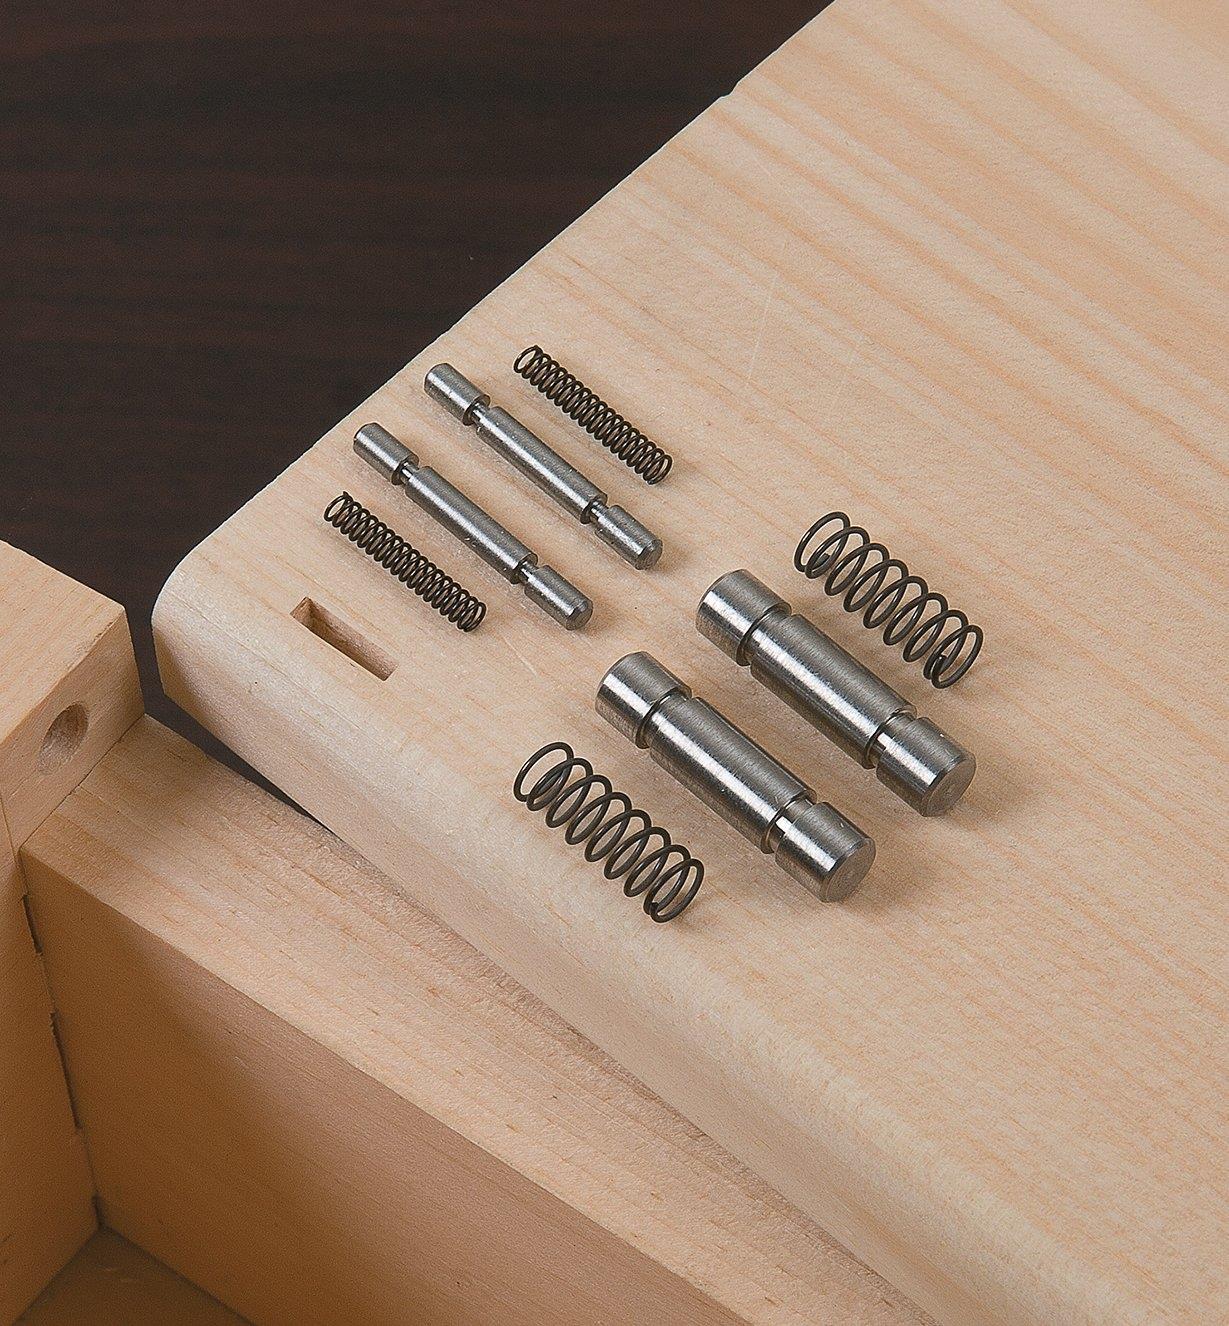 Both sizes of hinge pins and springs sitting on a box lid